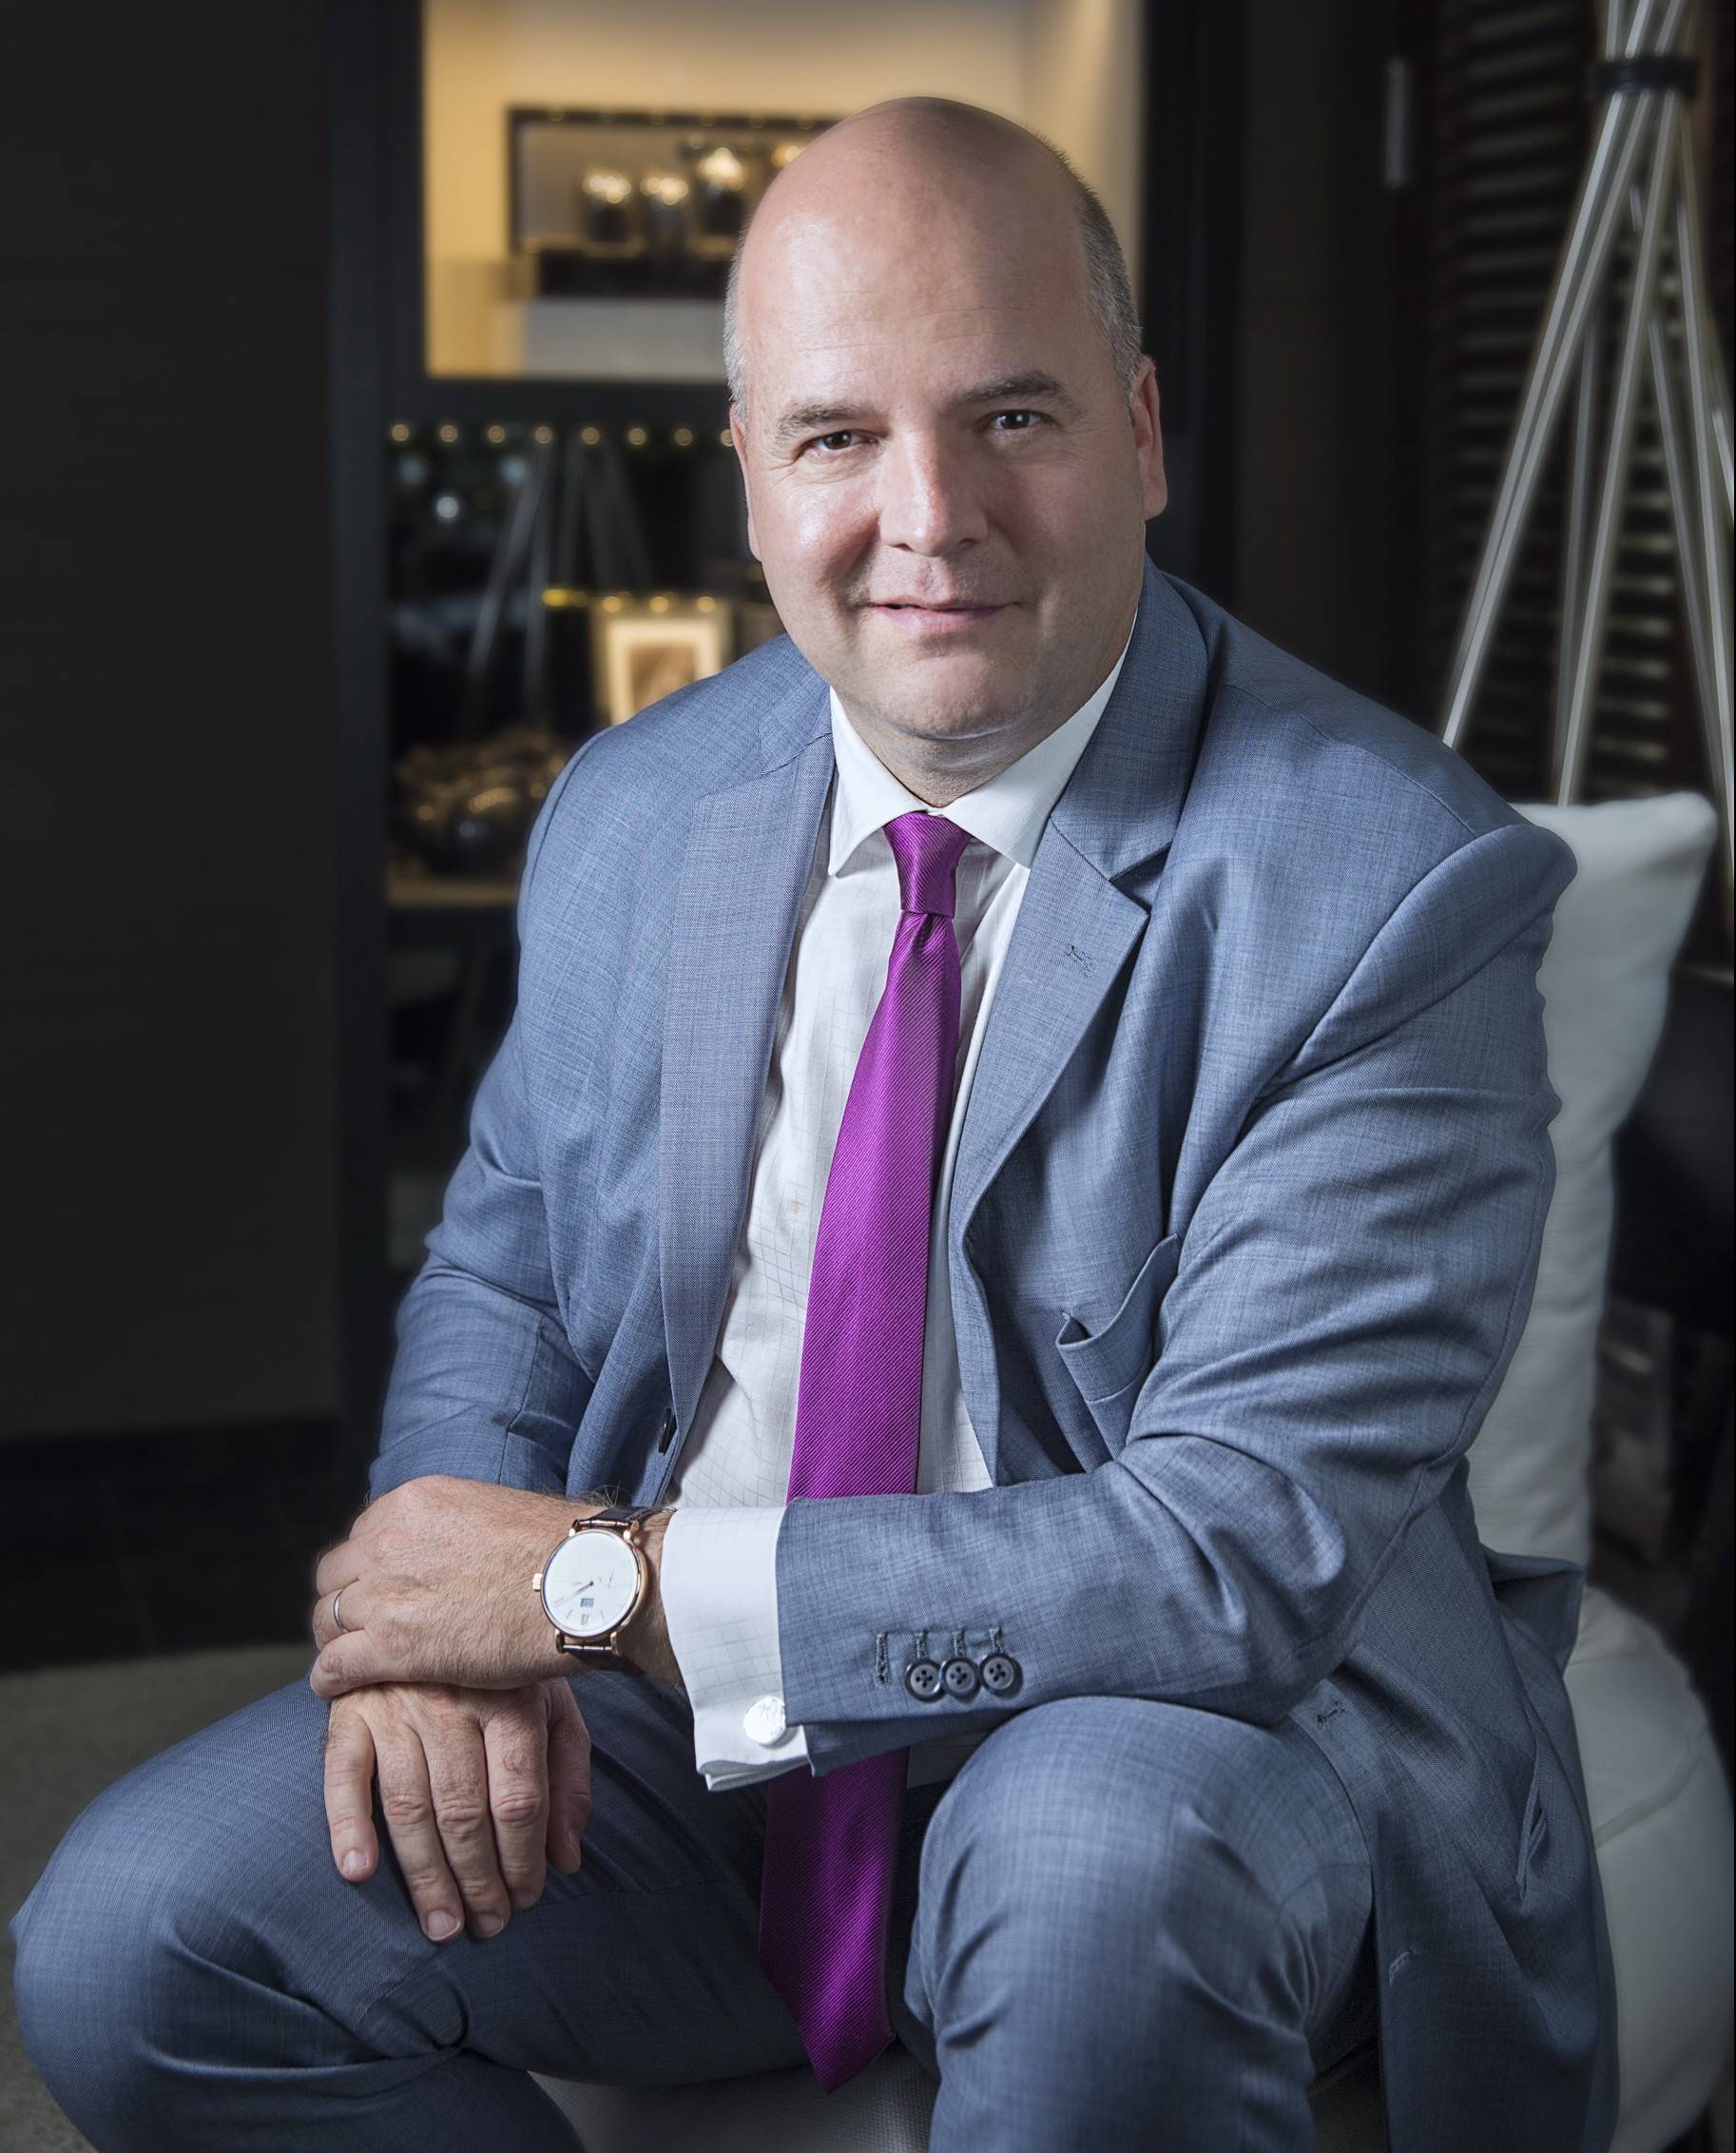 IWC Announces Luc Rochereau As New Regional Brand Director For The Middle East And India